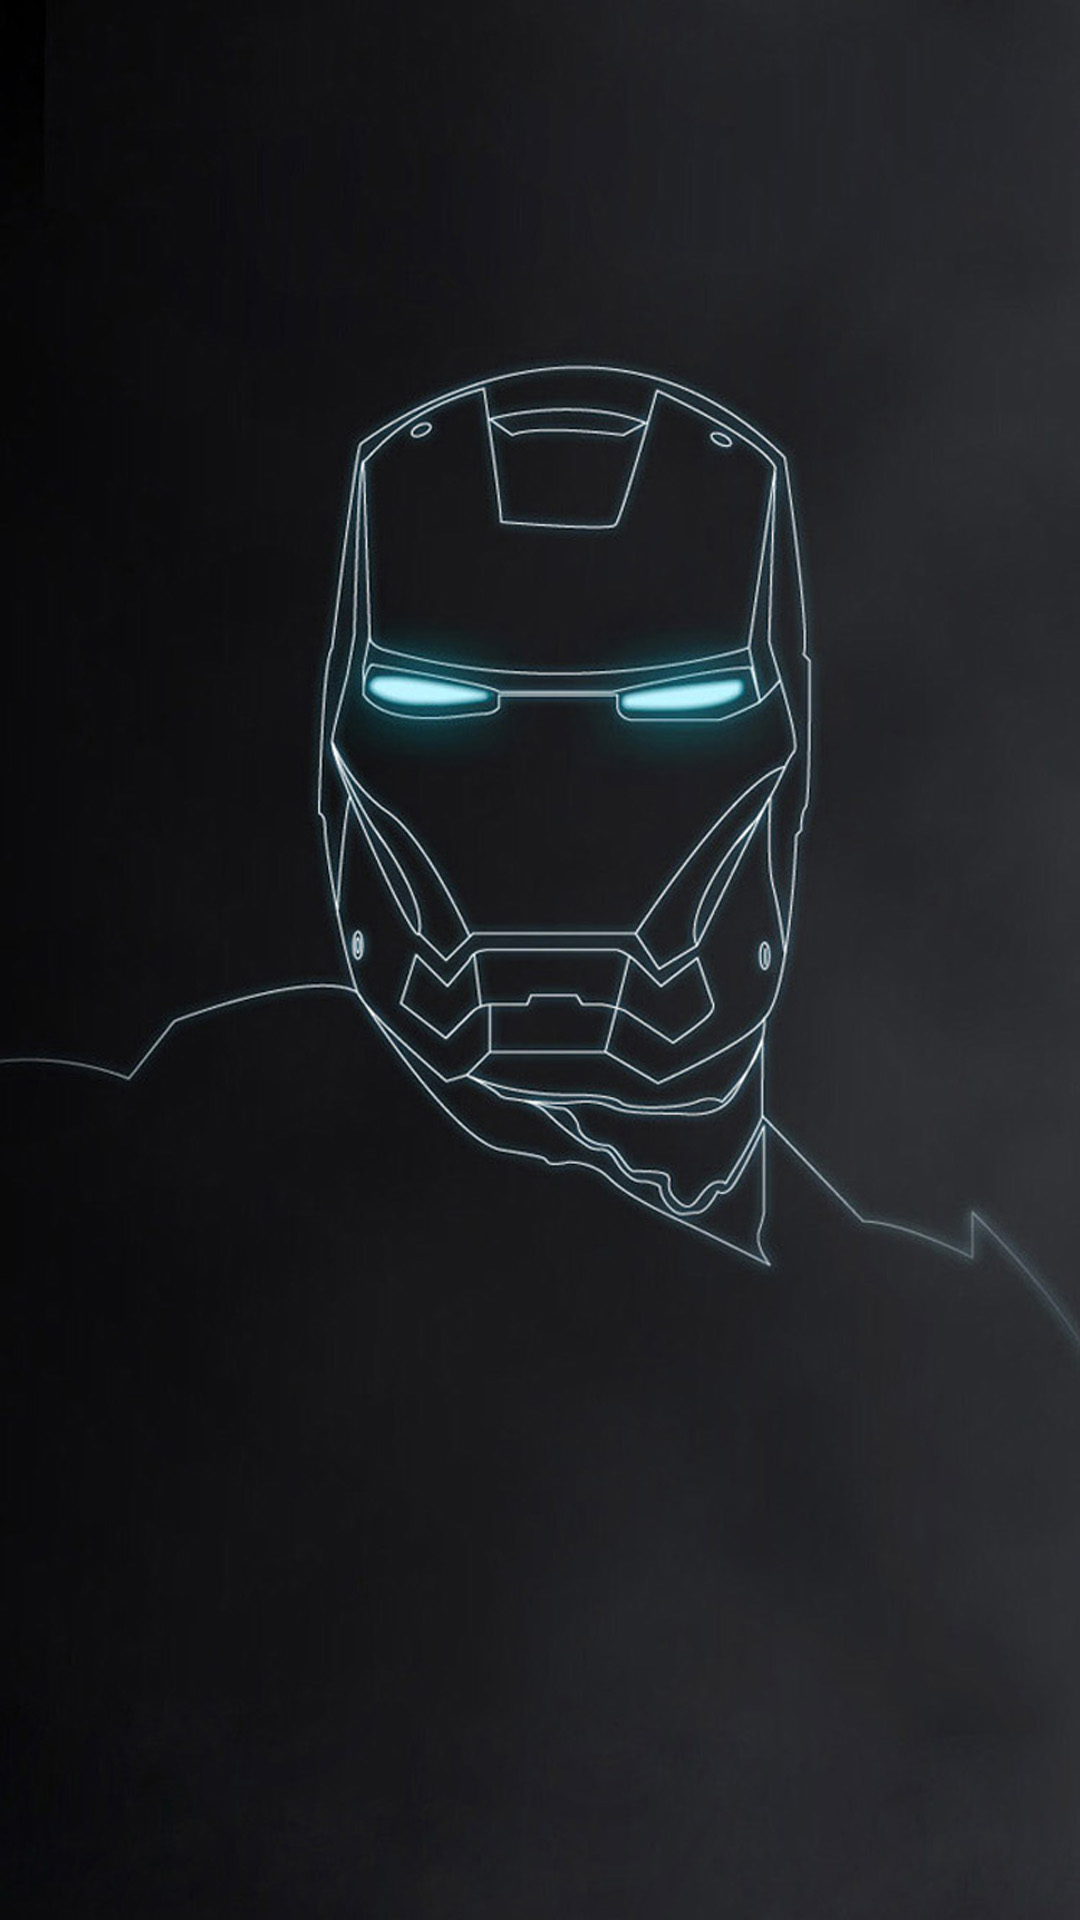 iron man wallpaper for iphone 6,automotive design,helmet,fictional character,drawing,technology